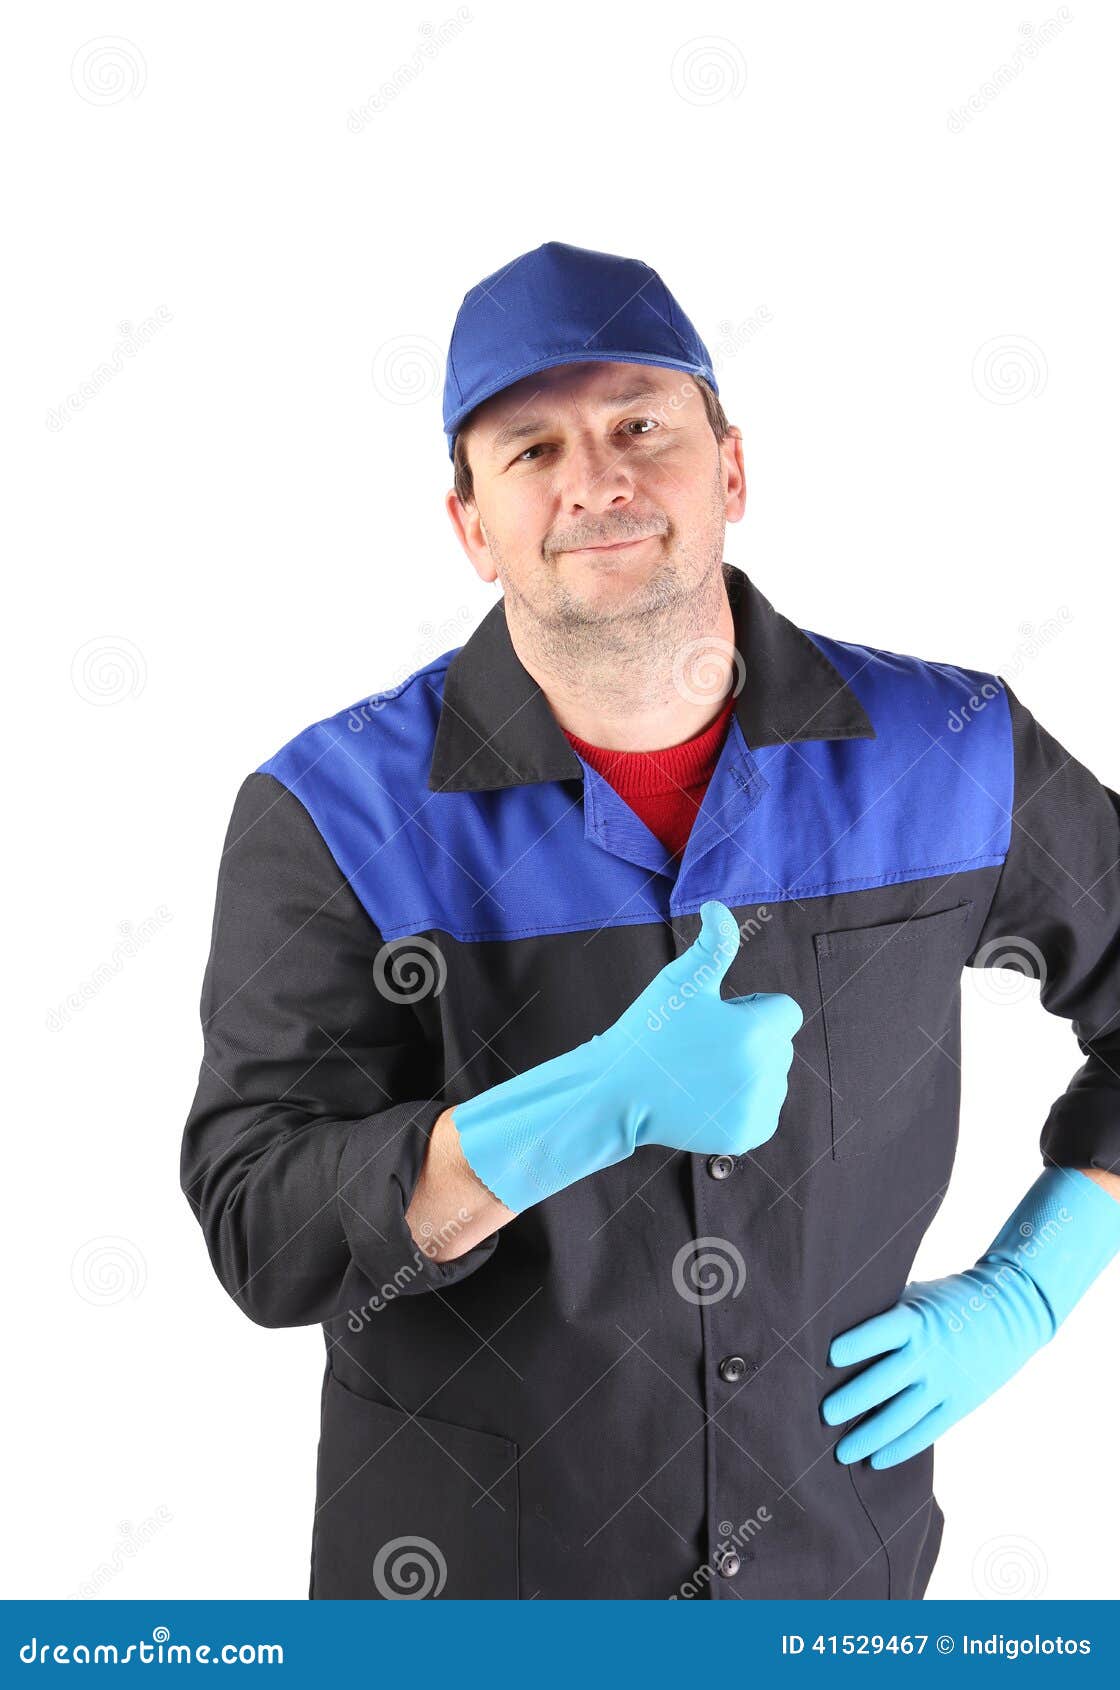 Cleaner showing thumbs up. stock image. Image of housekeeping - 41529467